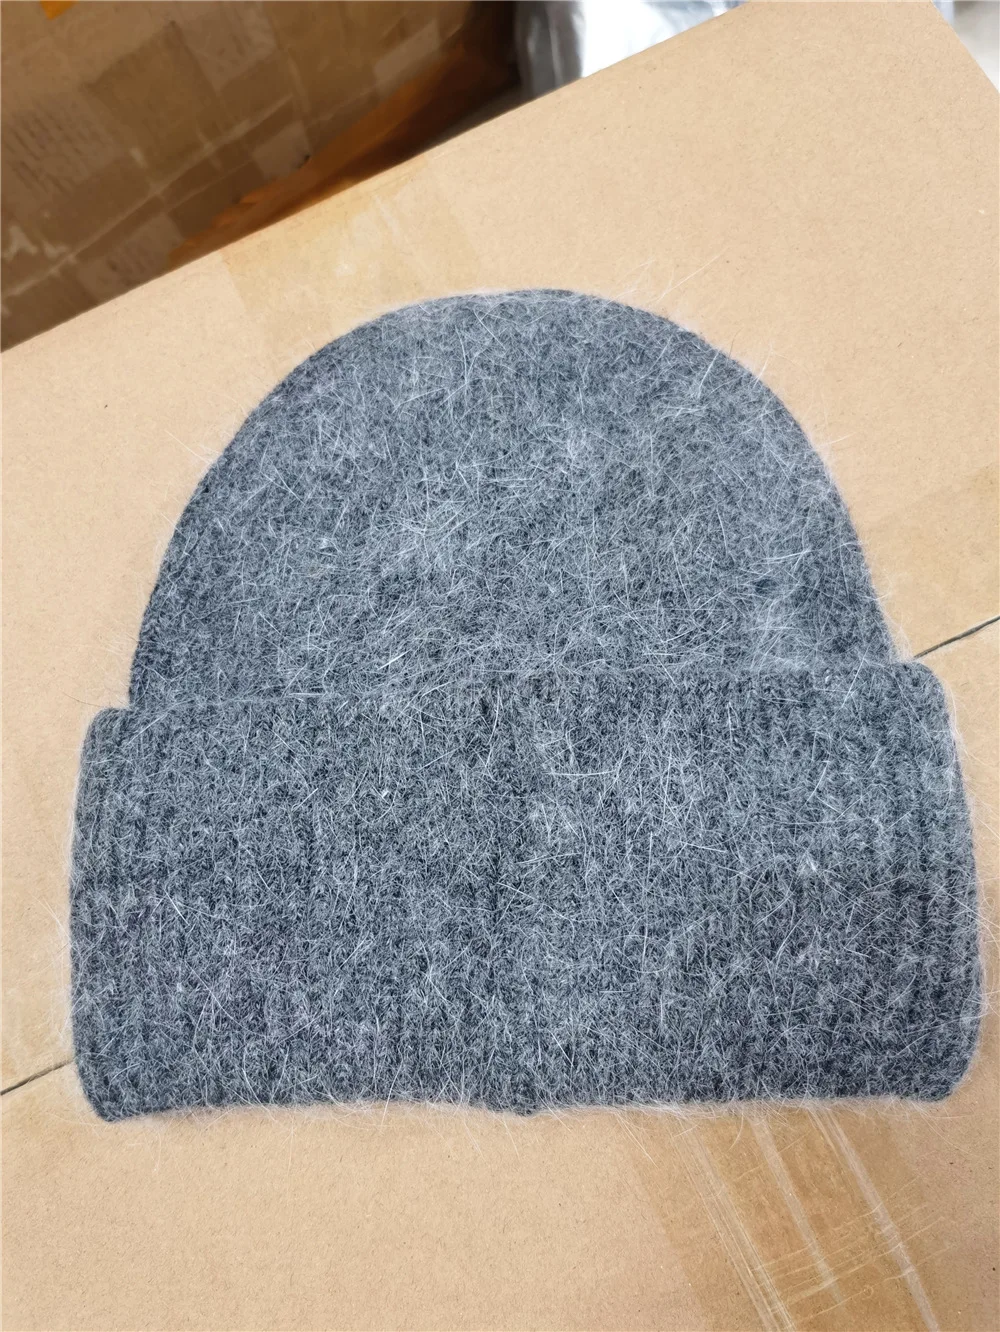 2021 Fashion Fabbit Fur Soft Warm Fluffy Winter Hat for women Angora Knitted Hat skullies beanies Female bonnet woman knit Cap skully with brim